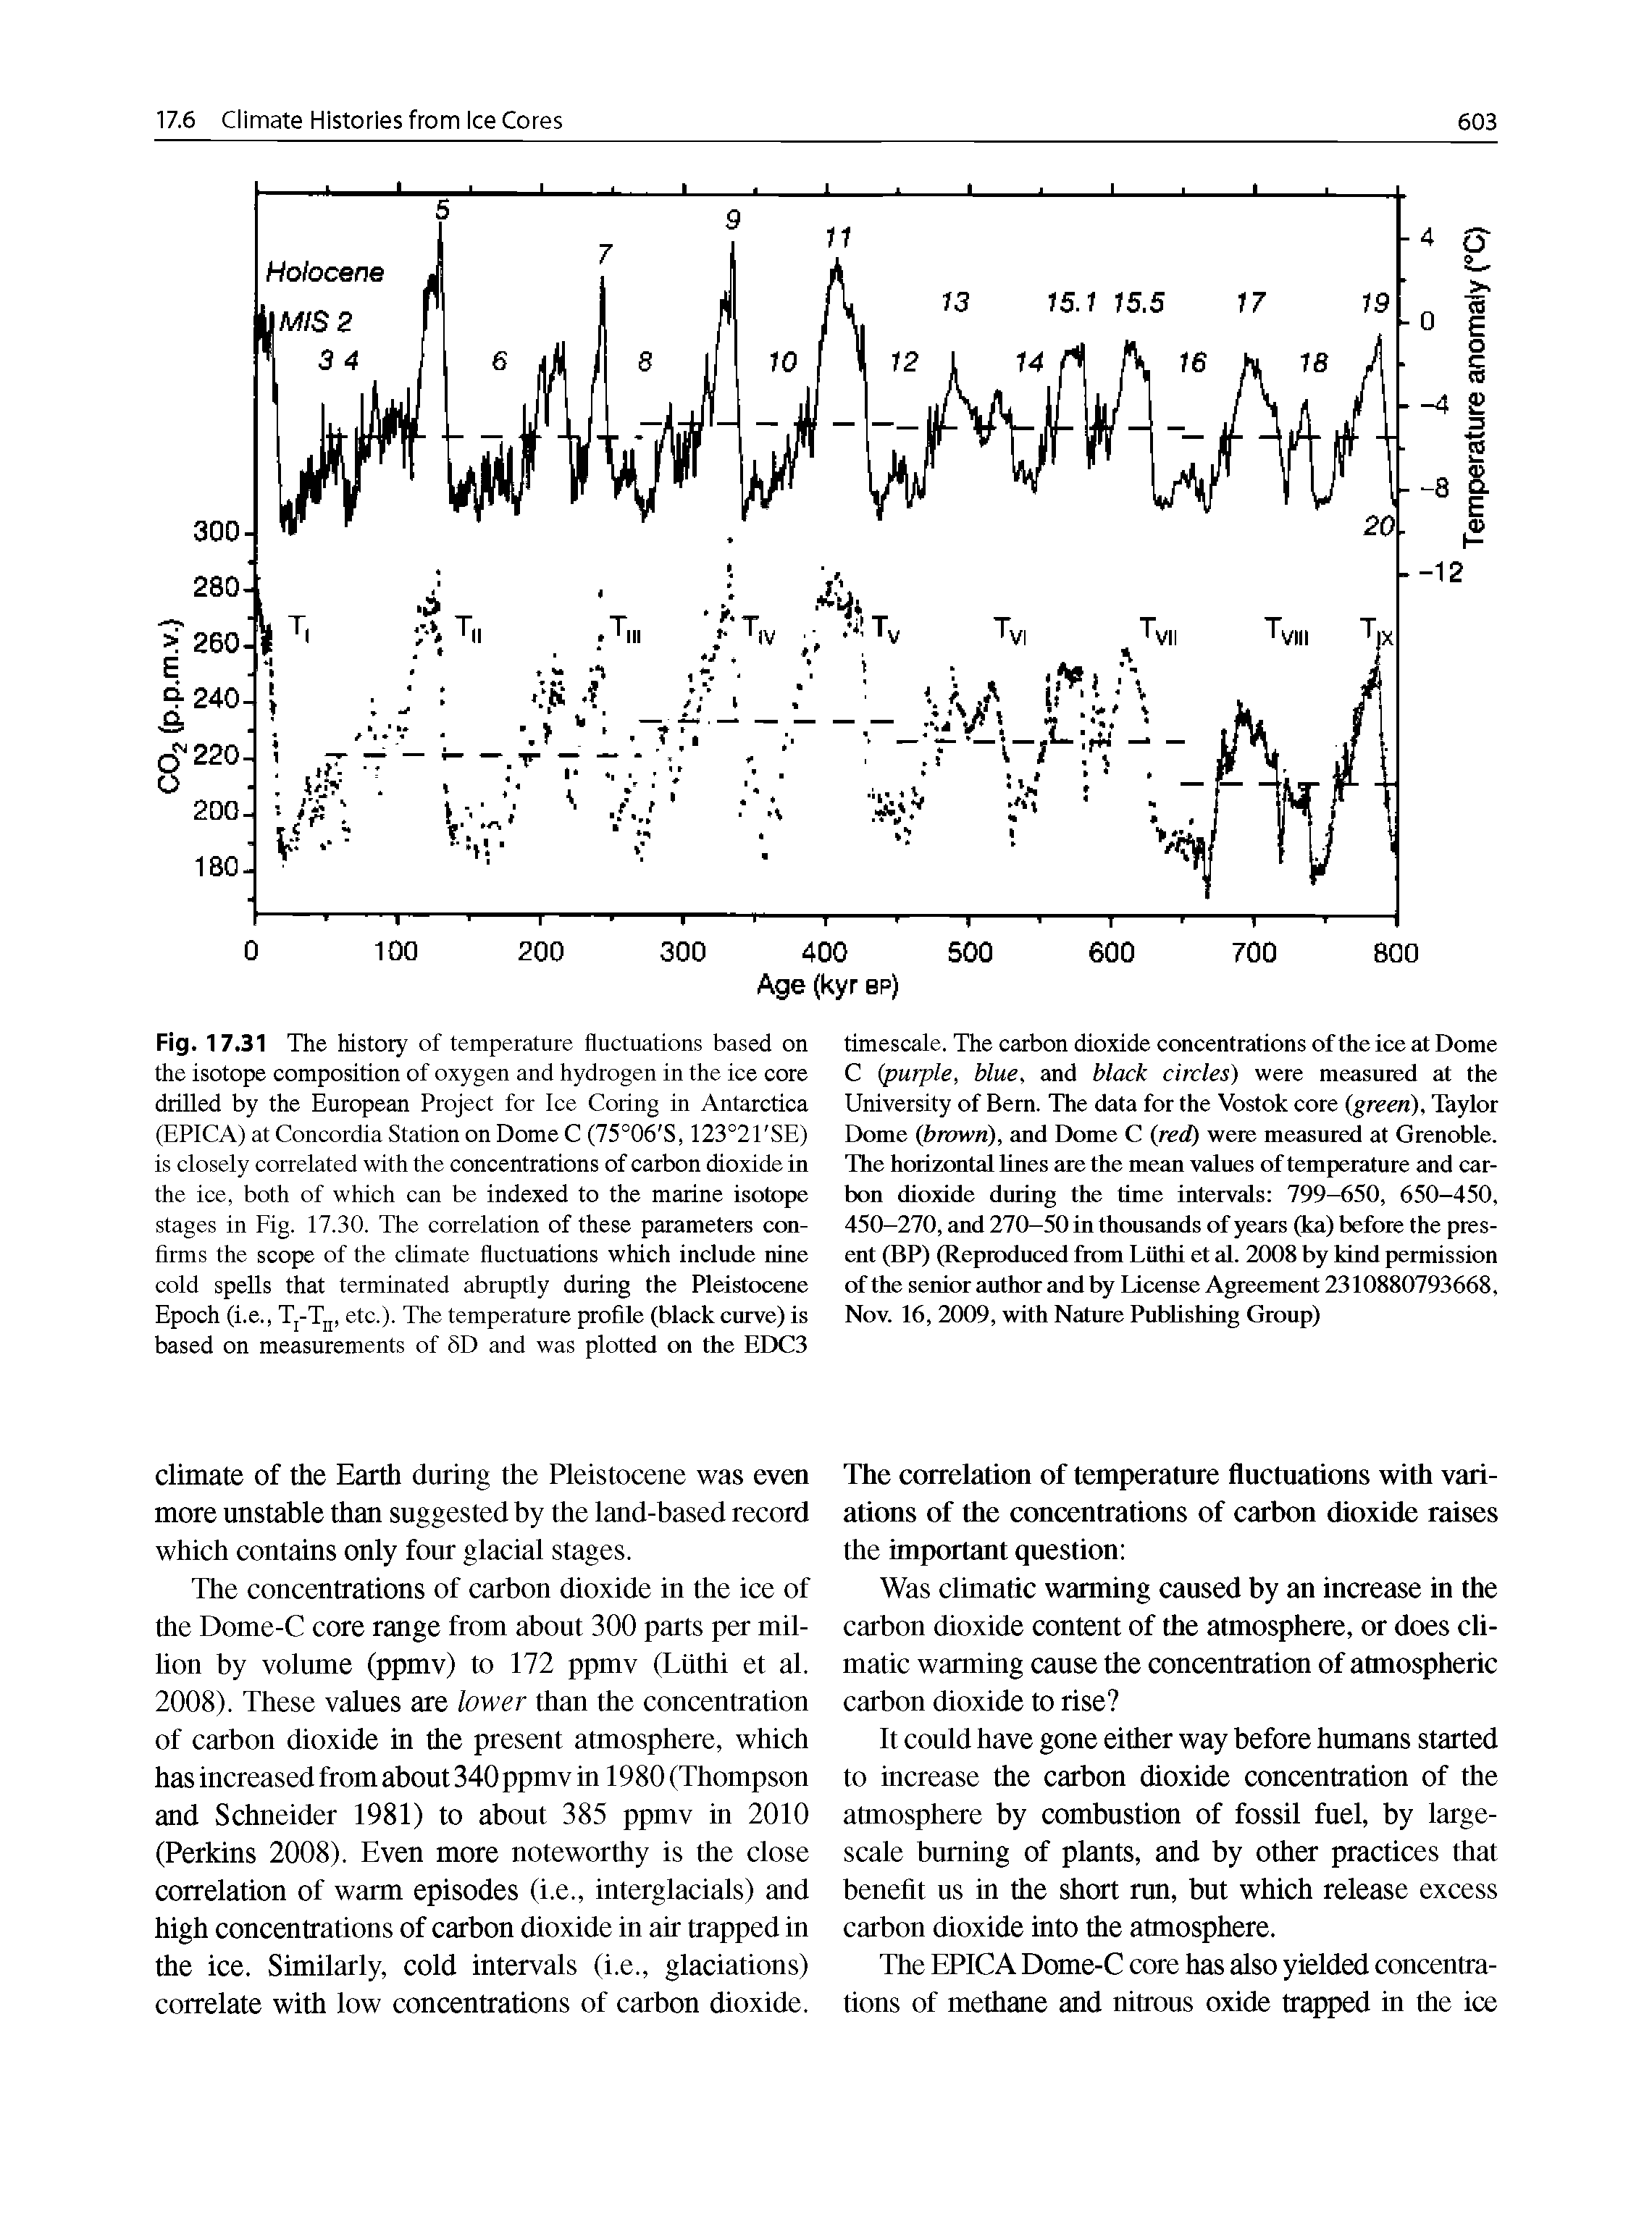 Fig. 17.31 The history of temperature fluctuations based on the isotope composition of oxygen and hydrogen in the ice core drilled by the European Project for Ice Coring in Antarctica (EPICA) at Concordia Station on Dome C (75°06 S, 123°21 SE) is closely correlated with the concentrations of carbon dioxide in the ice, both of which can be indexed to the marine isotope stages in Fig. 17.30. The correlation of these parameters confirms the scope of the chmate fluctuations which include nine cold spells that terminated abruptly during the Pleistocene Epoch (i.e., Tj-Tjj, etc.). The temperature profile (black curve) is based on measurements of 6D and was plotted on the EDC3...